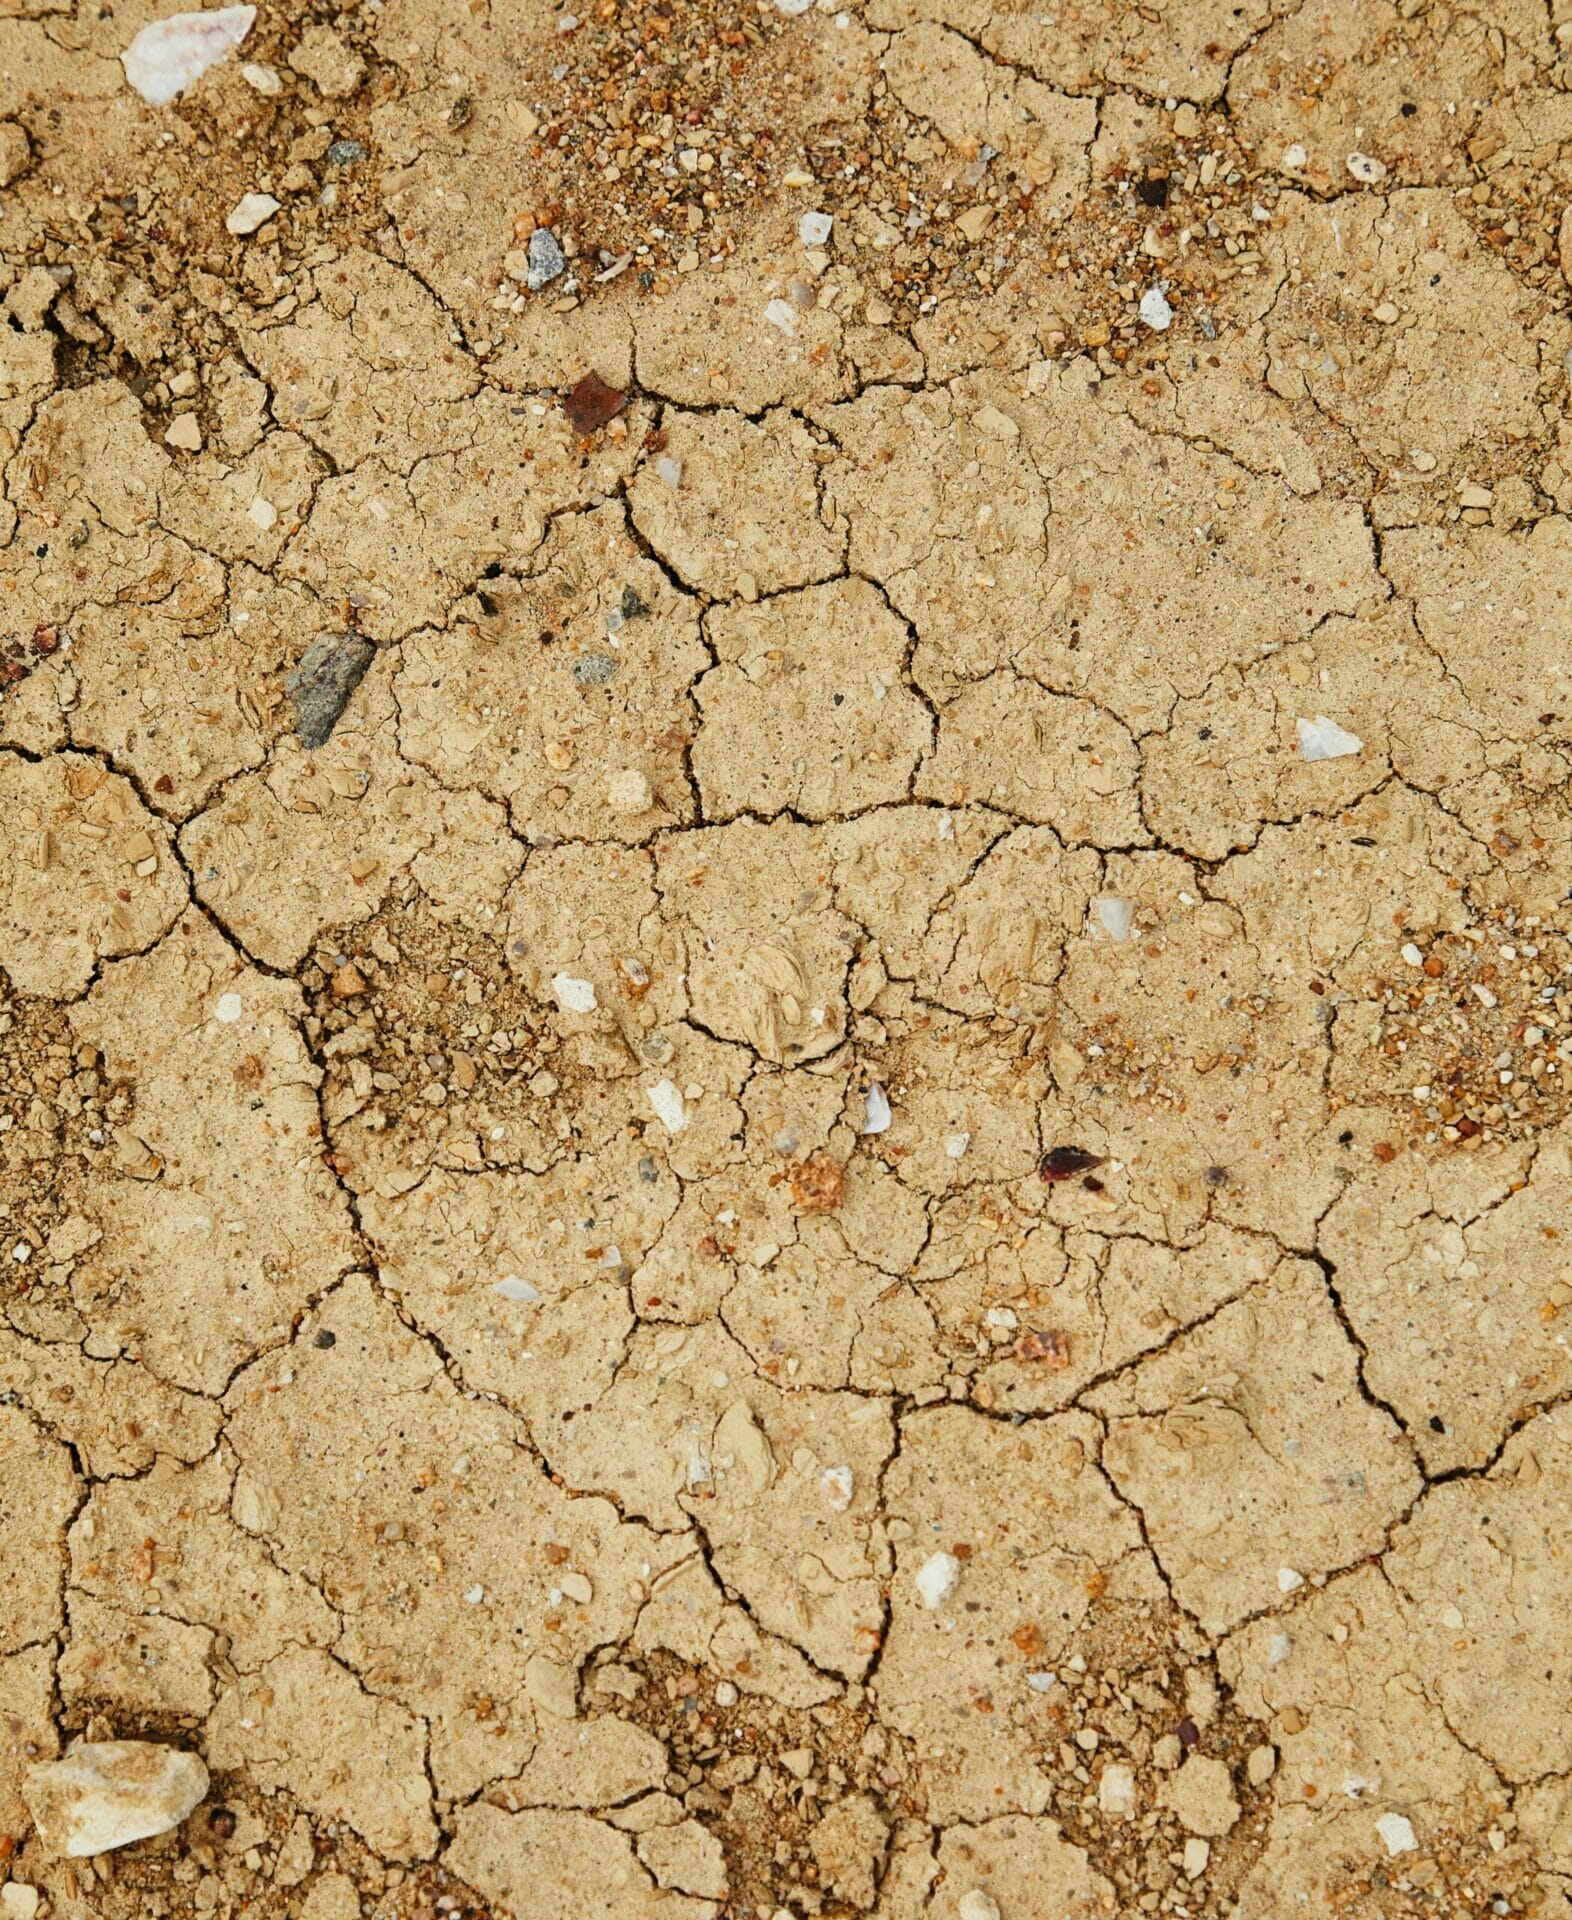 Dry cracked earth surface